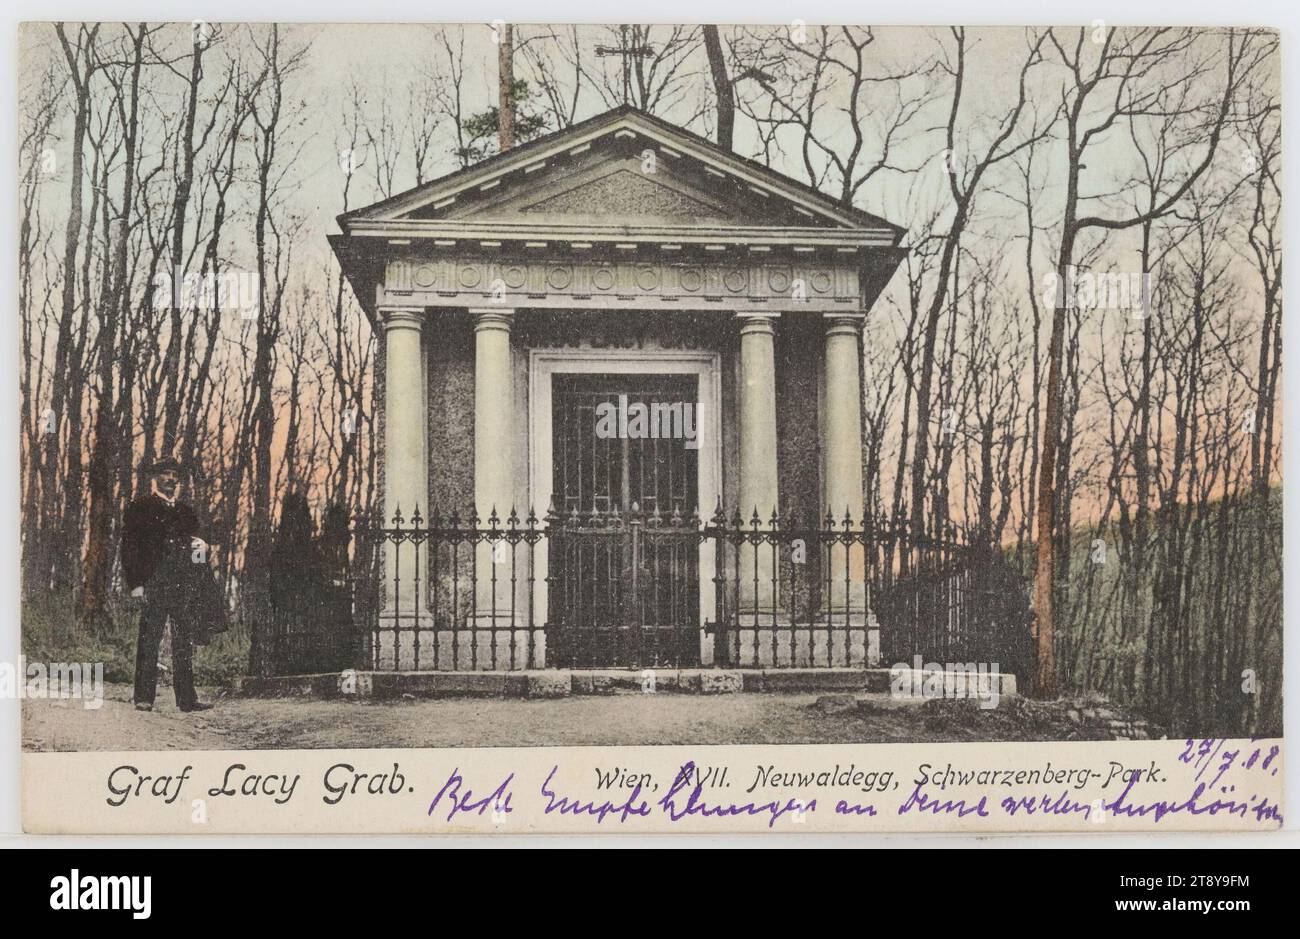 17th, Neuwaldegg - Neuwaldegg Park - Lacy Tomb, picture postcard, Sperlings Postkartenverlag (M. M. S.), producer, 1908, cardboard, hand-colored, collotype, info, text, See more in Wien Museum Magazine article, ''Oh Gegend meiner Wahl!'. Count Lacy's Holländerdörfl on the Hameau', inscription, FROM, Vienna, TO, Obertauern, ADDRESS, Miss Hotel Wiesenegg post Obertauern Salzburg, MESSAGE Stock Photo